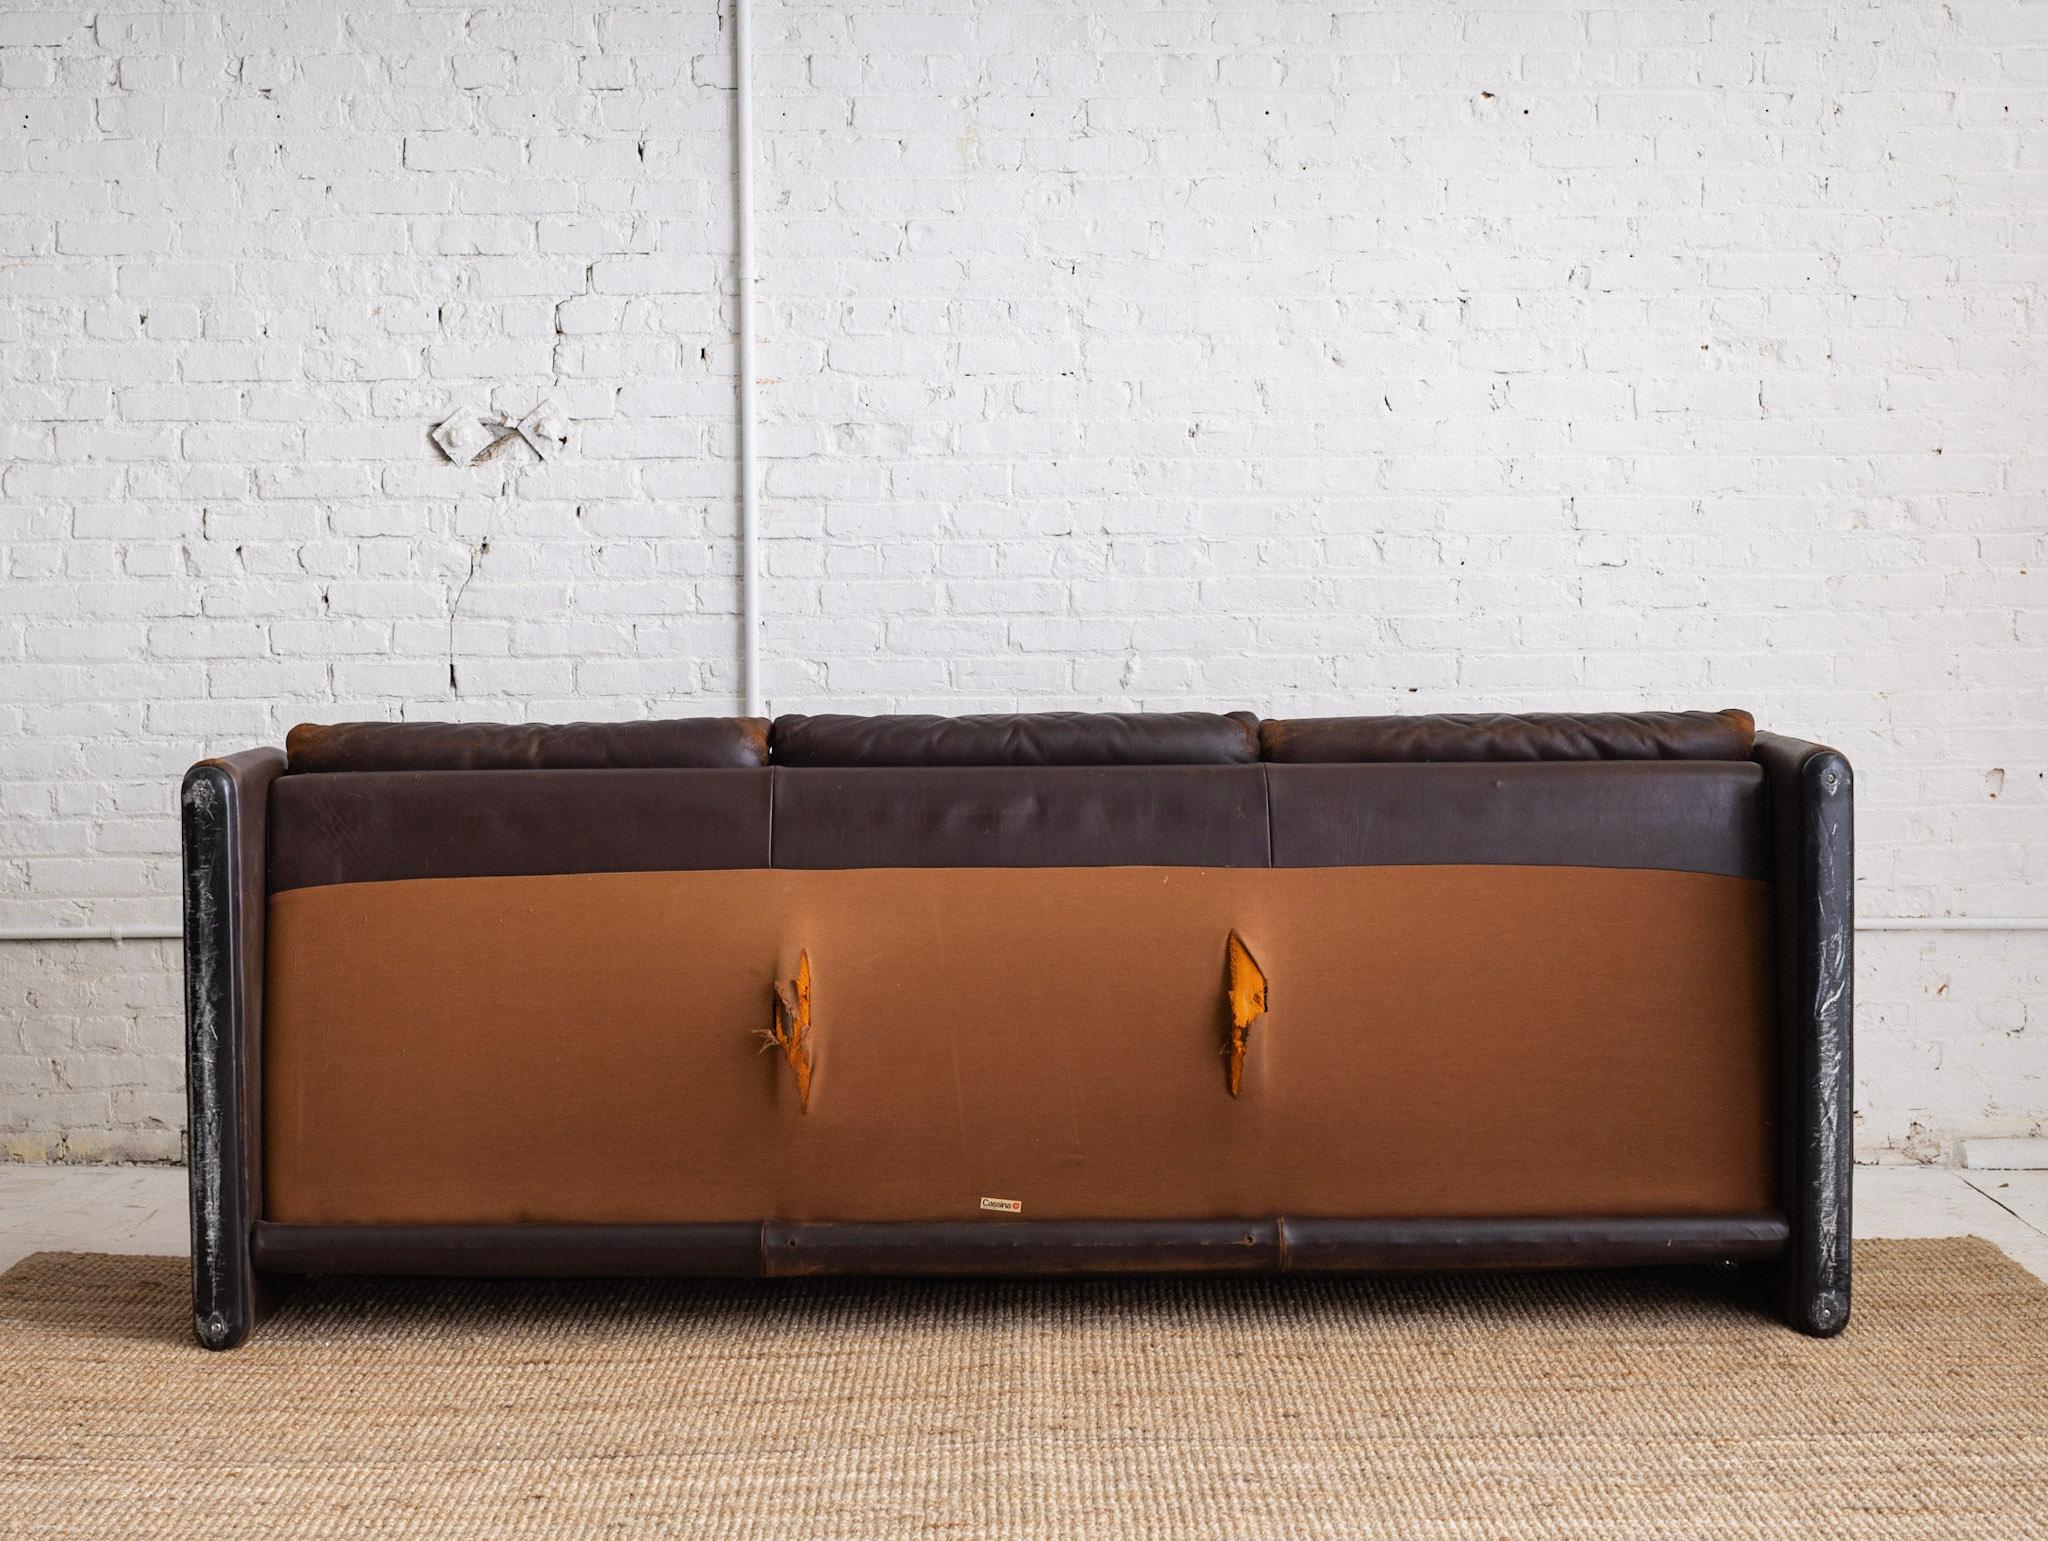 Maralunga 3 Seat Sofa by Vico Magistretti for Cassina in Chocolate Brown Leather 4